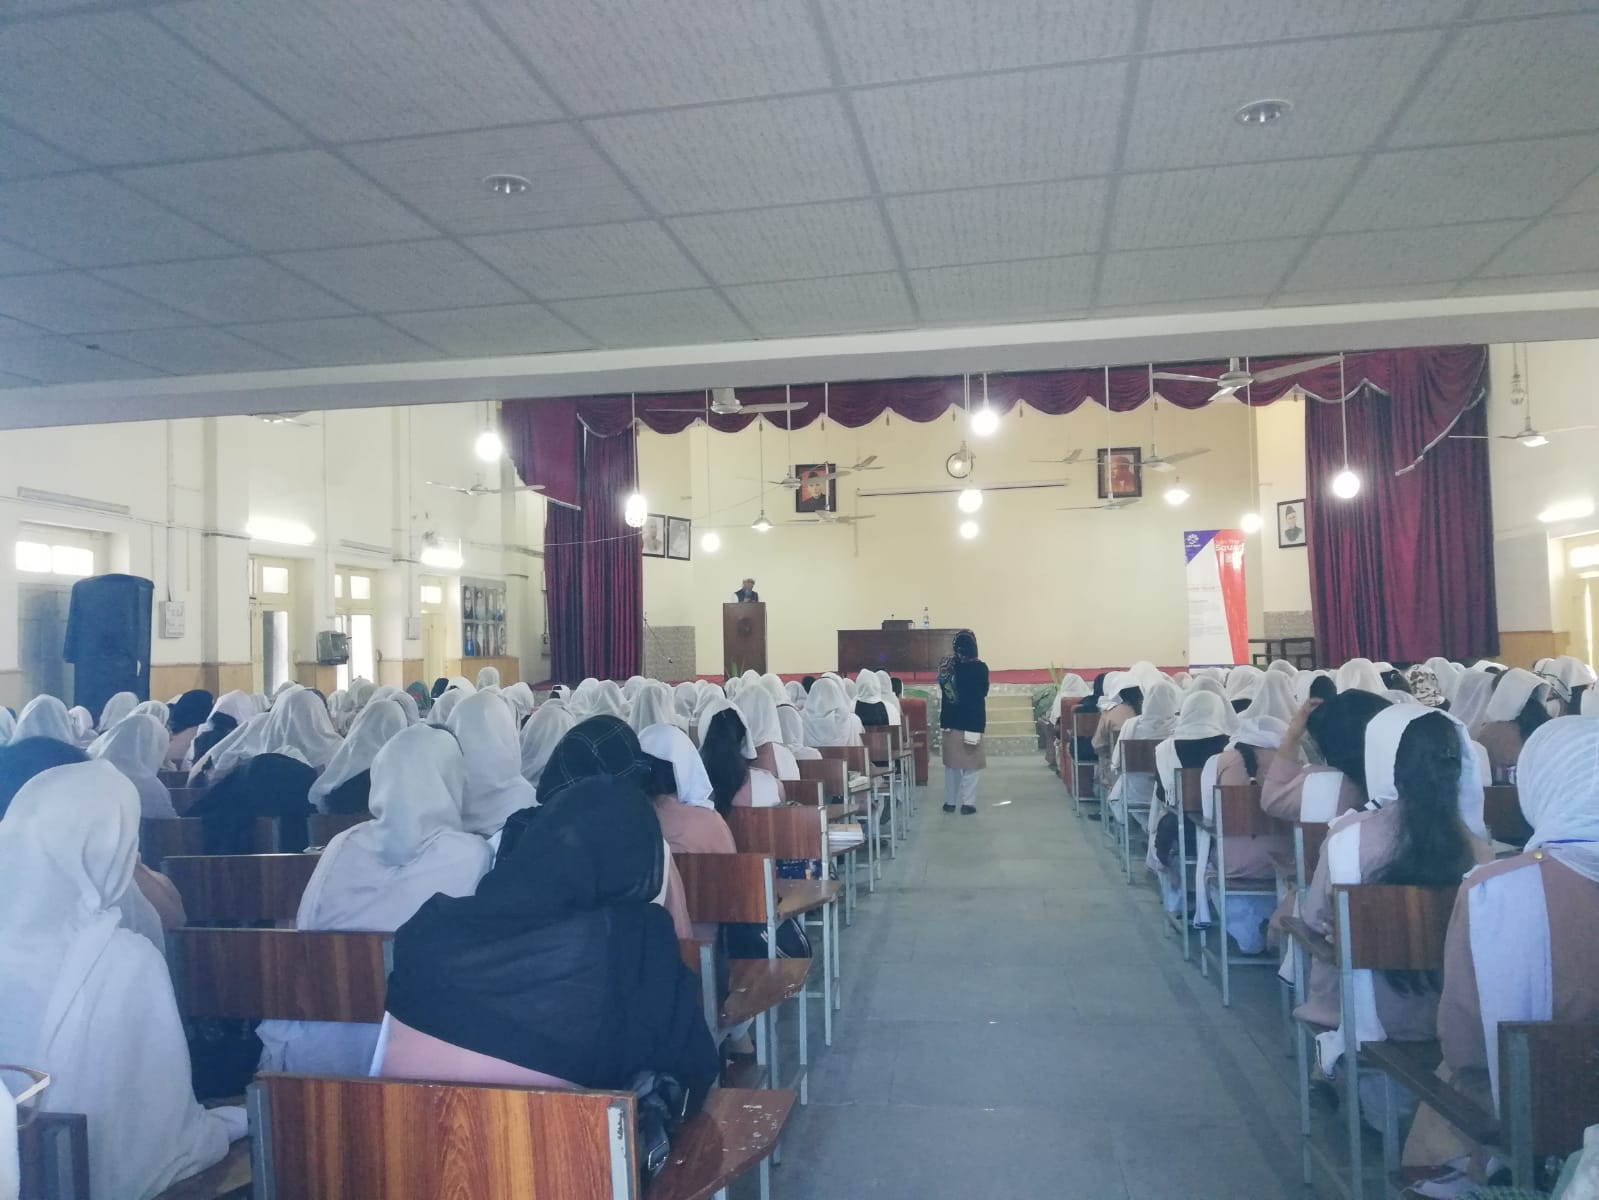 Jinnah college for women, University of  Peshawar arranged a seminar  on the 7th of November 2022 on *Character Building*. The lecture was delivered by a well versed Islamic scholar Shaykh Mufti Touqeer Ahmad.  The students and faculty attended the talk with keen interest and asked several questions regarding their daily life for guidence under the light of Islam. Arrangements of seminars and extention lectures is a  regular co-curricular activity  for the students at JCW.